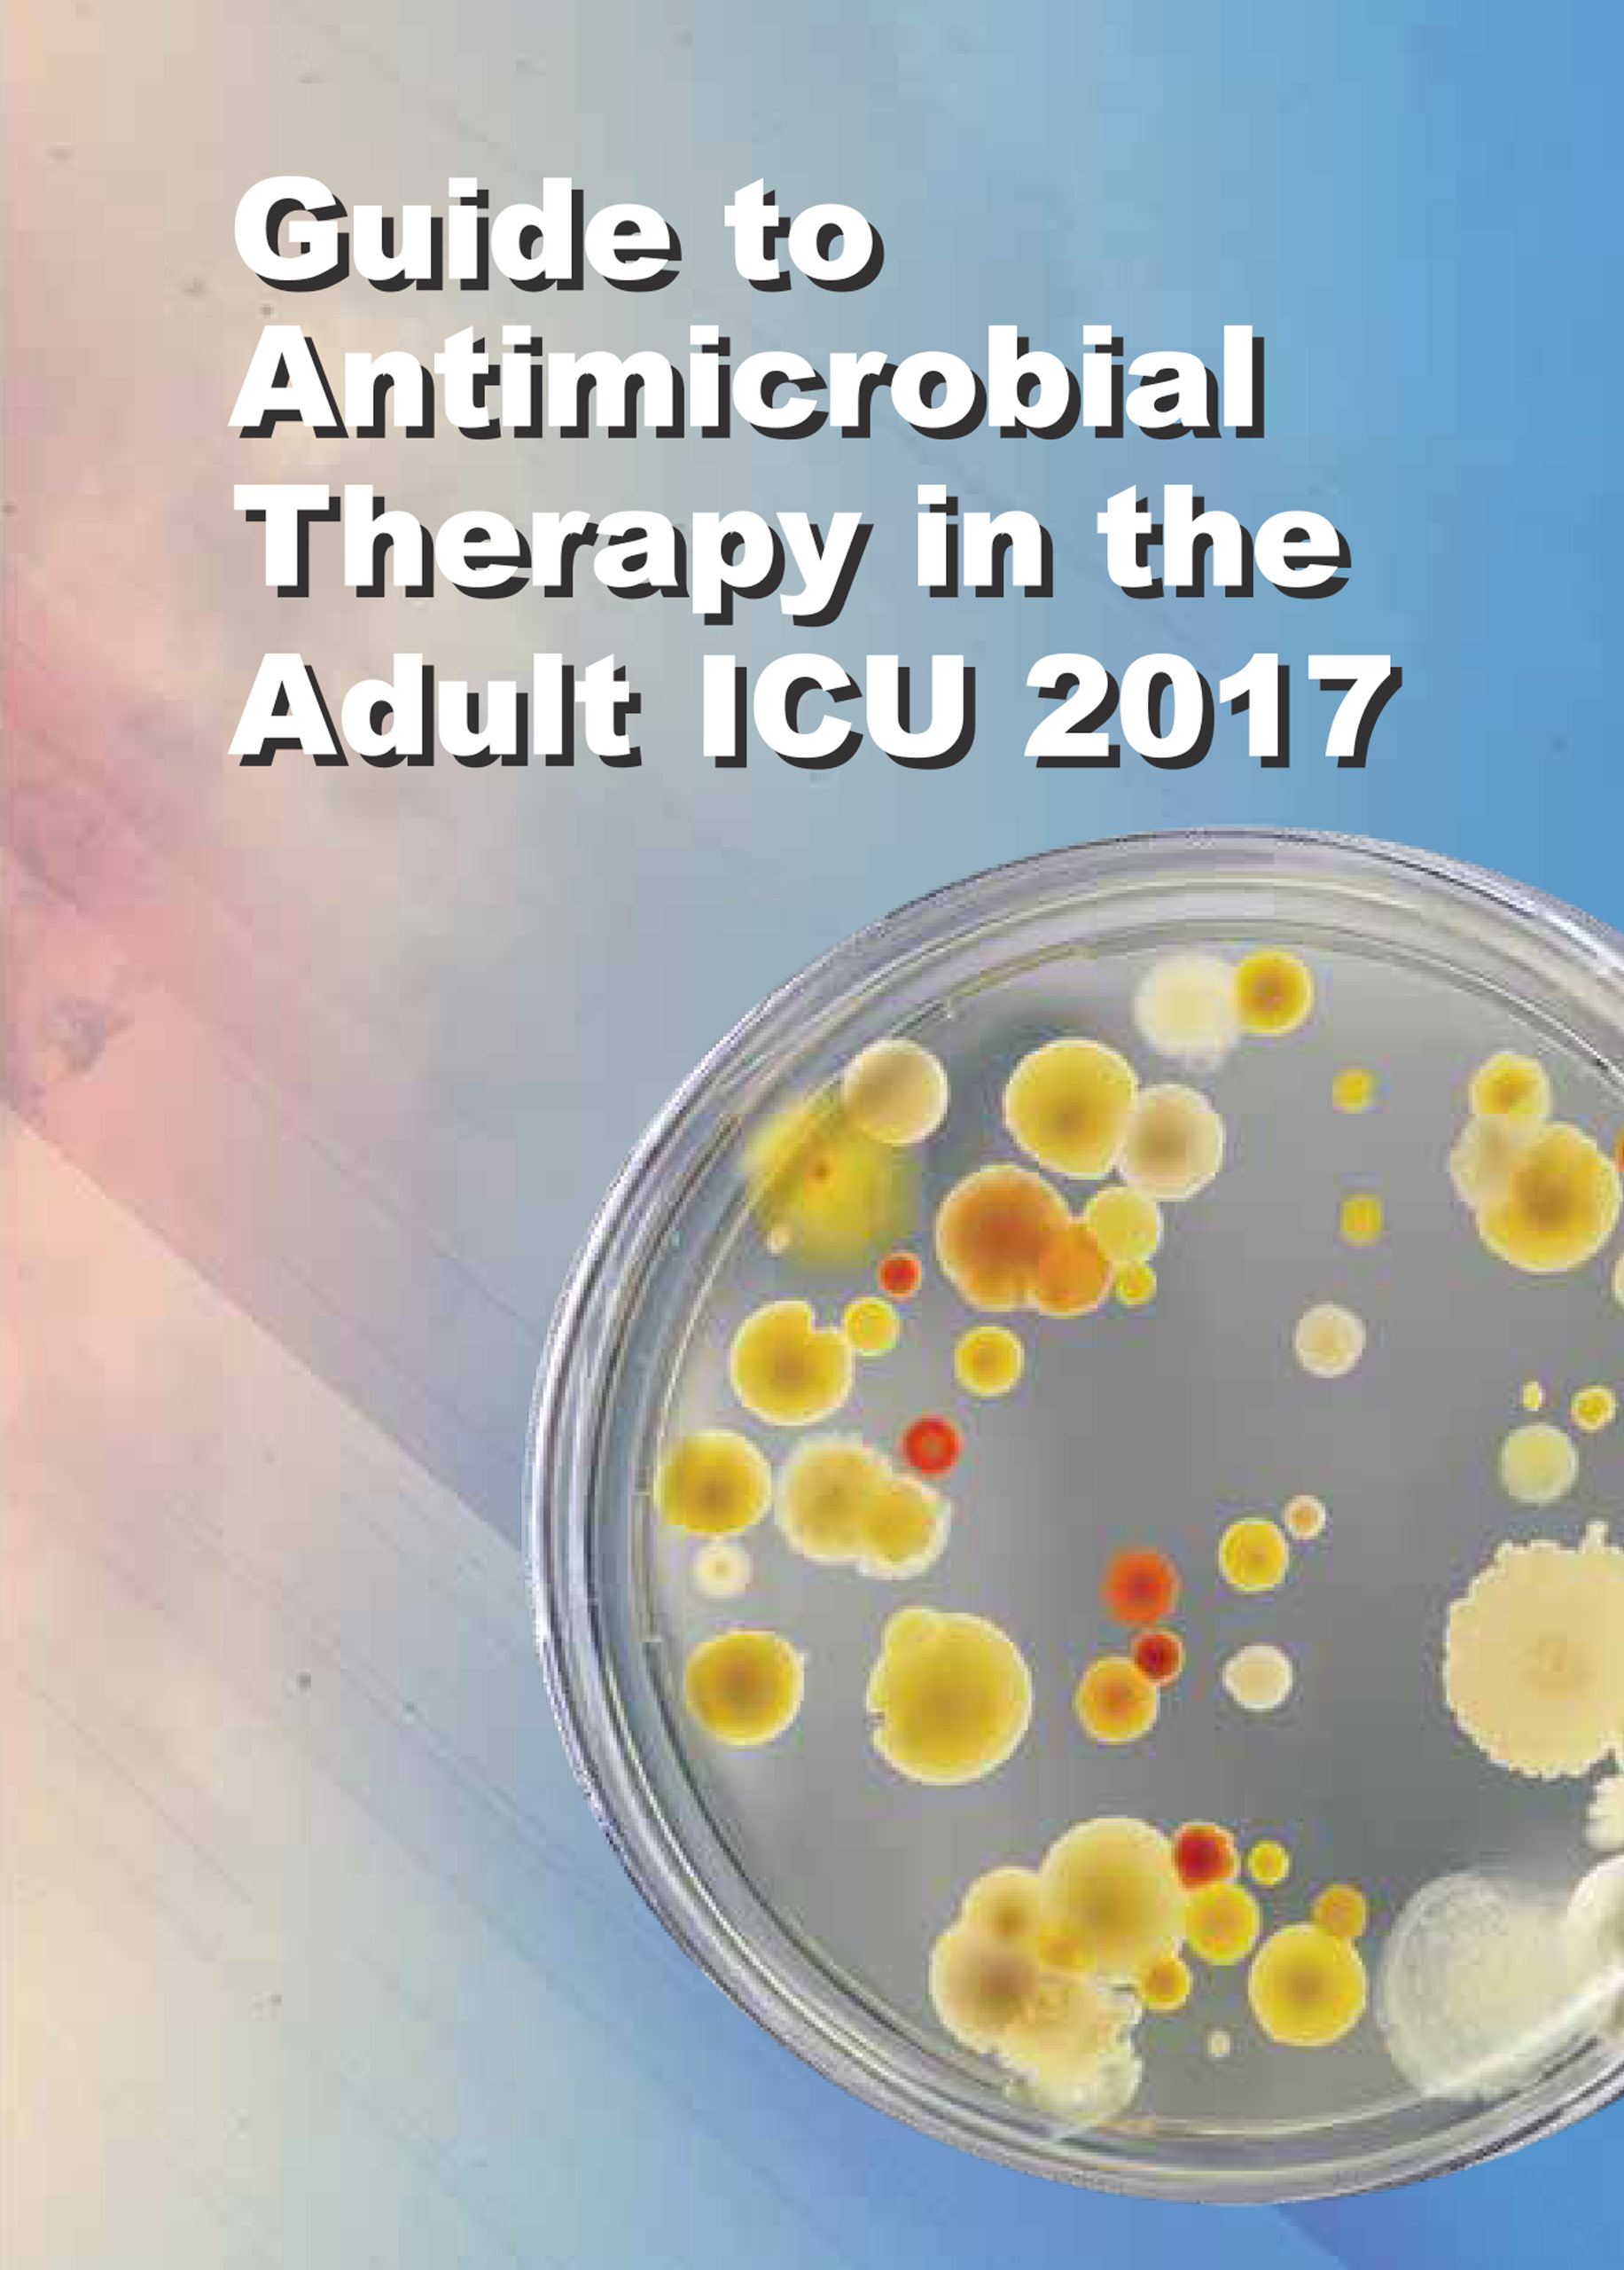 Guide to Antimicrobial Therapy in the Adult ICU 2017